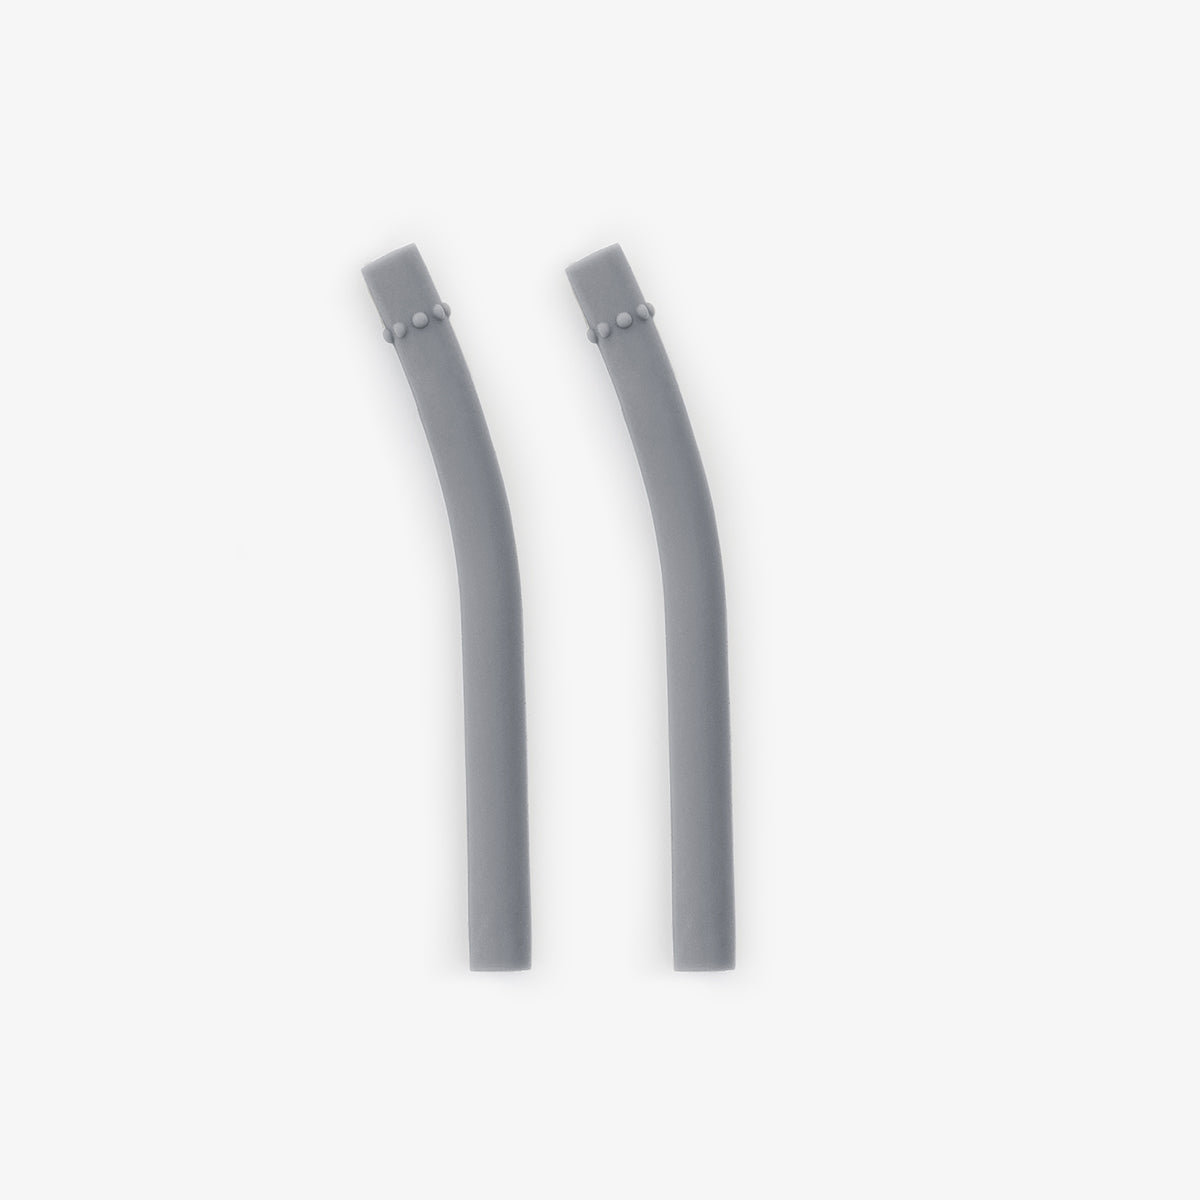 Mini Straws in Gray / Silicone Straw Replacement Pack for the ezpz Mini Cup & Straw System